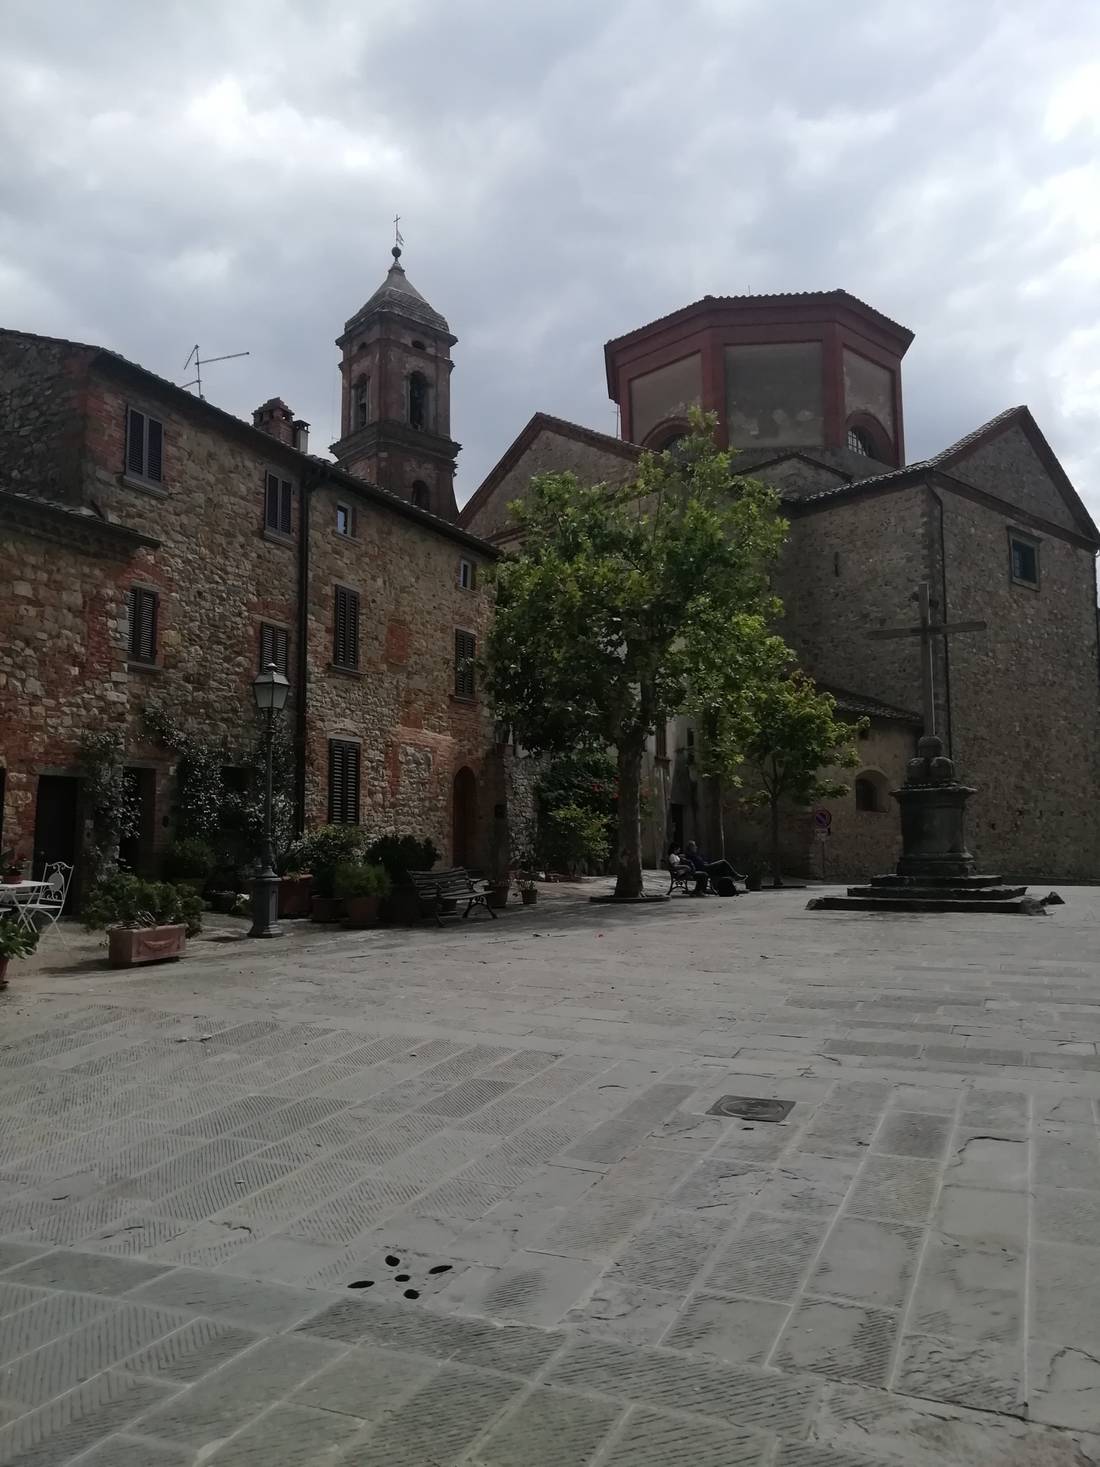 The main square. With the church of Saint Biagio and the church of misericordia. A 1400 church full of frescoes.